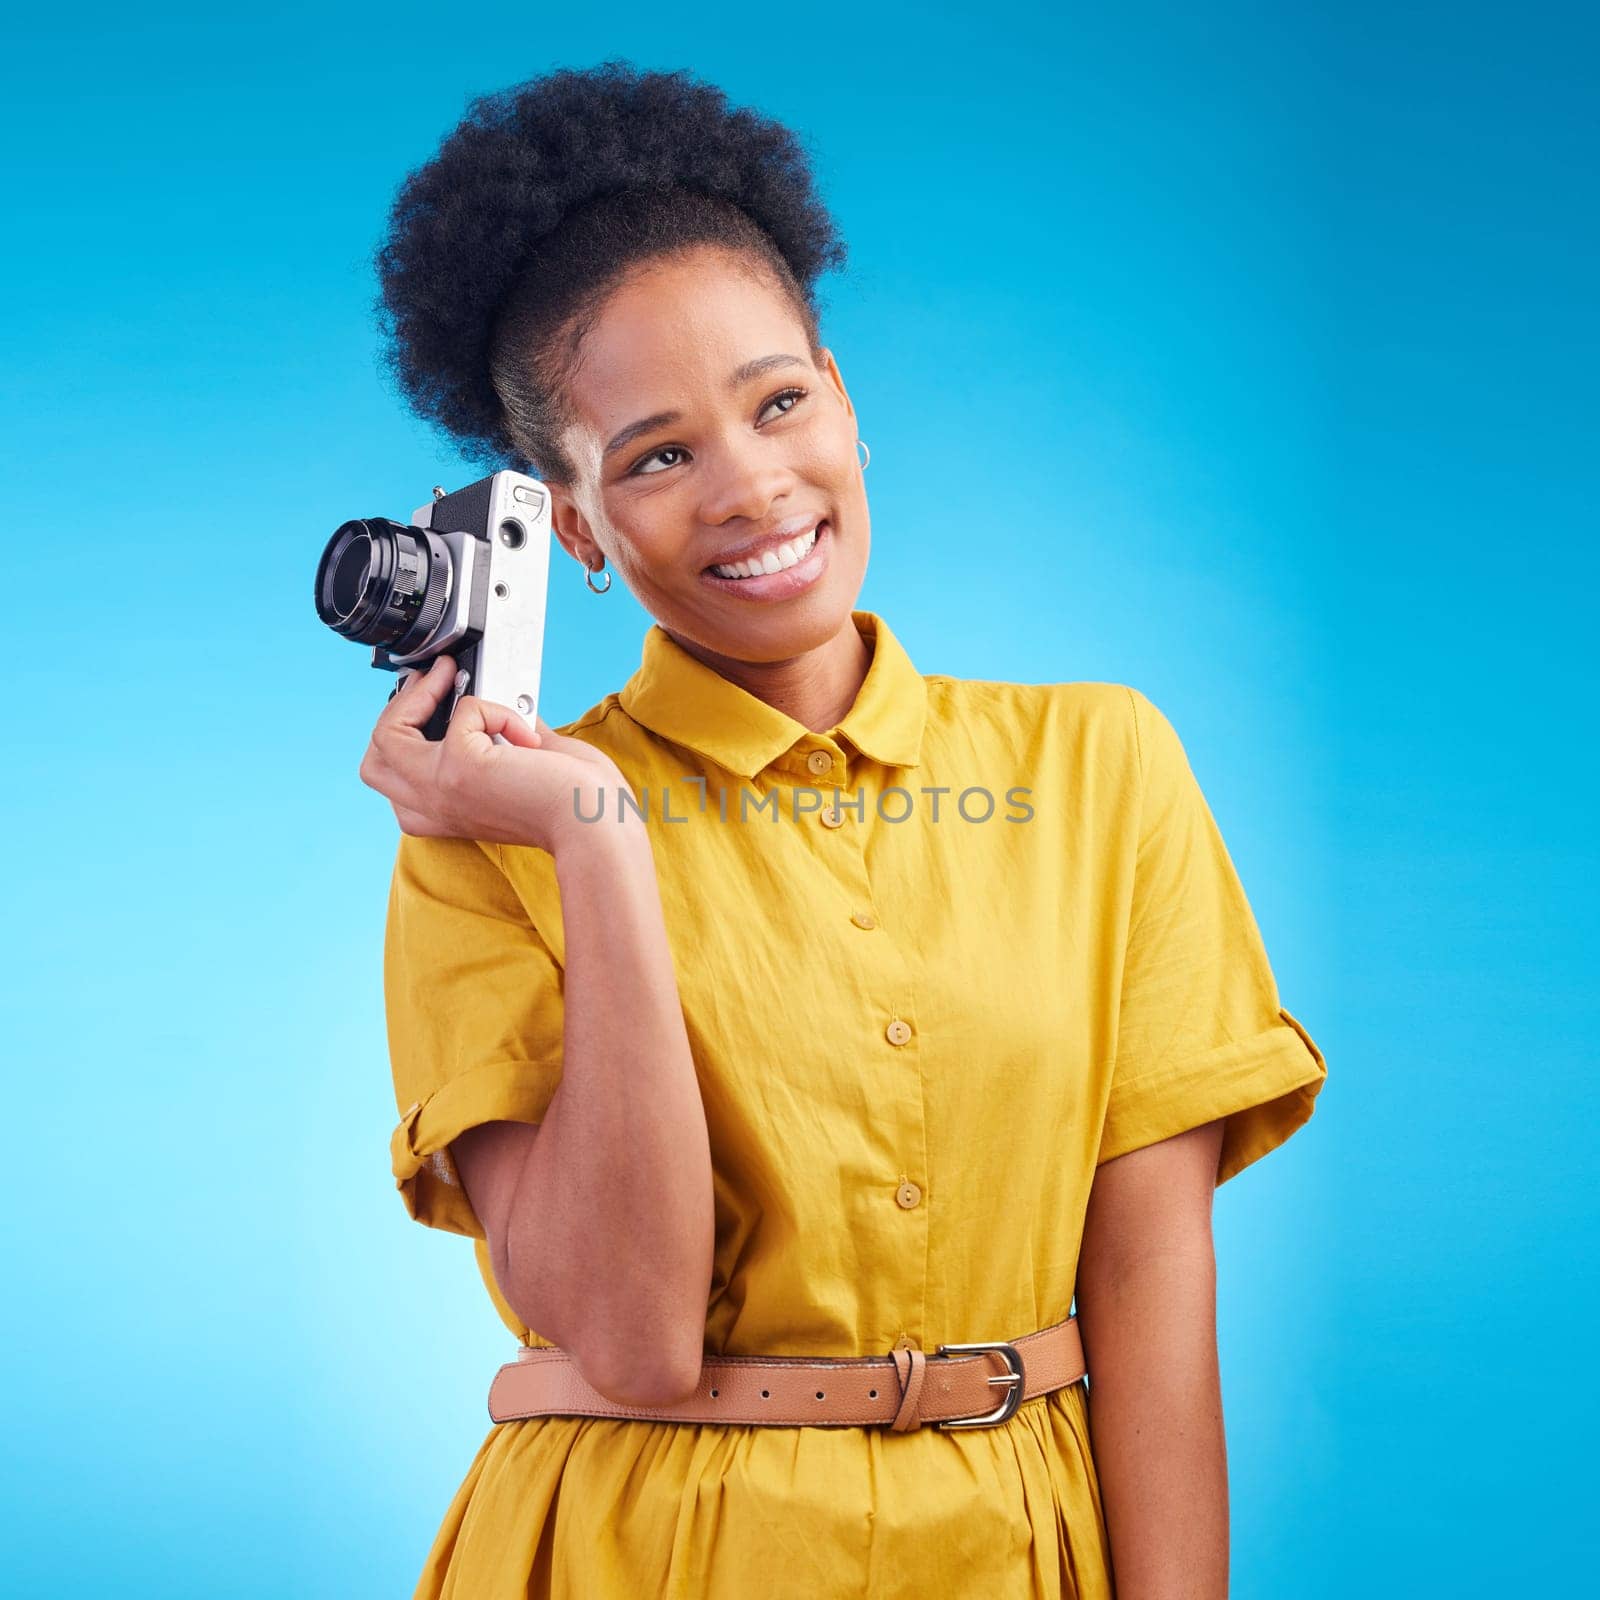 Photography, smile and black woman with camera isolated on blue background, creative artist job and talent. Art, face of happy photographer with hobby or career in studio on travel holiday photoshoot.